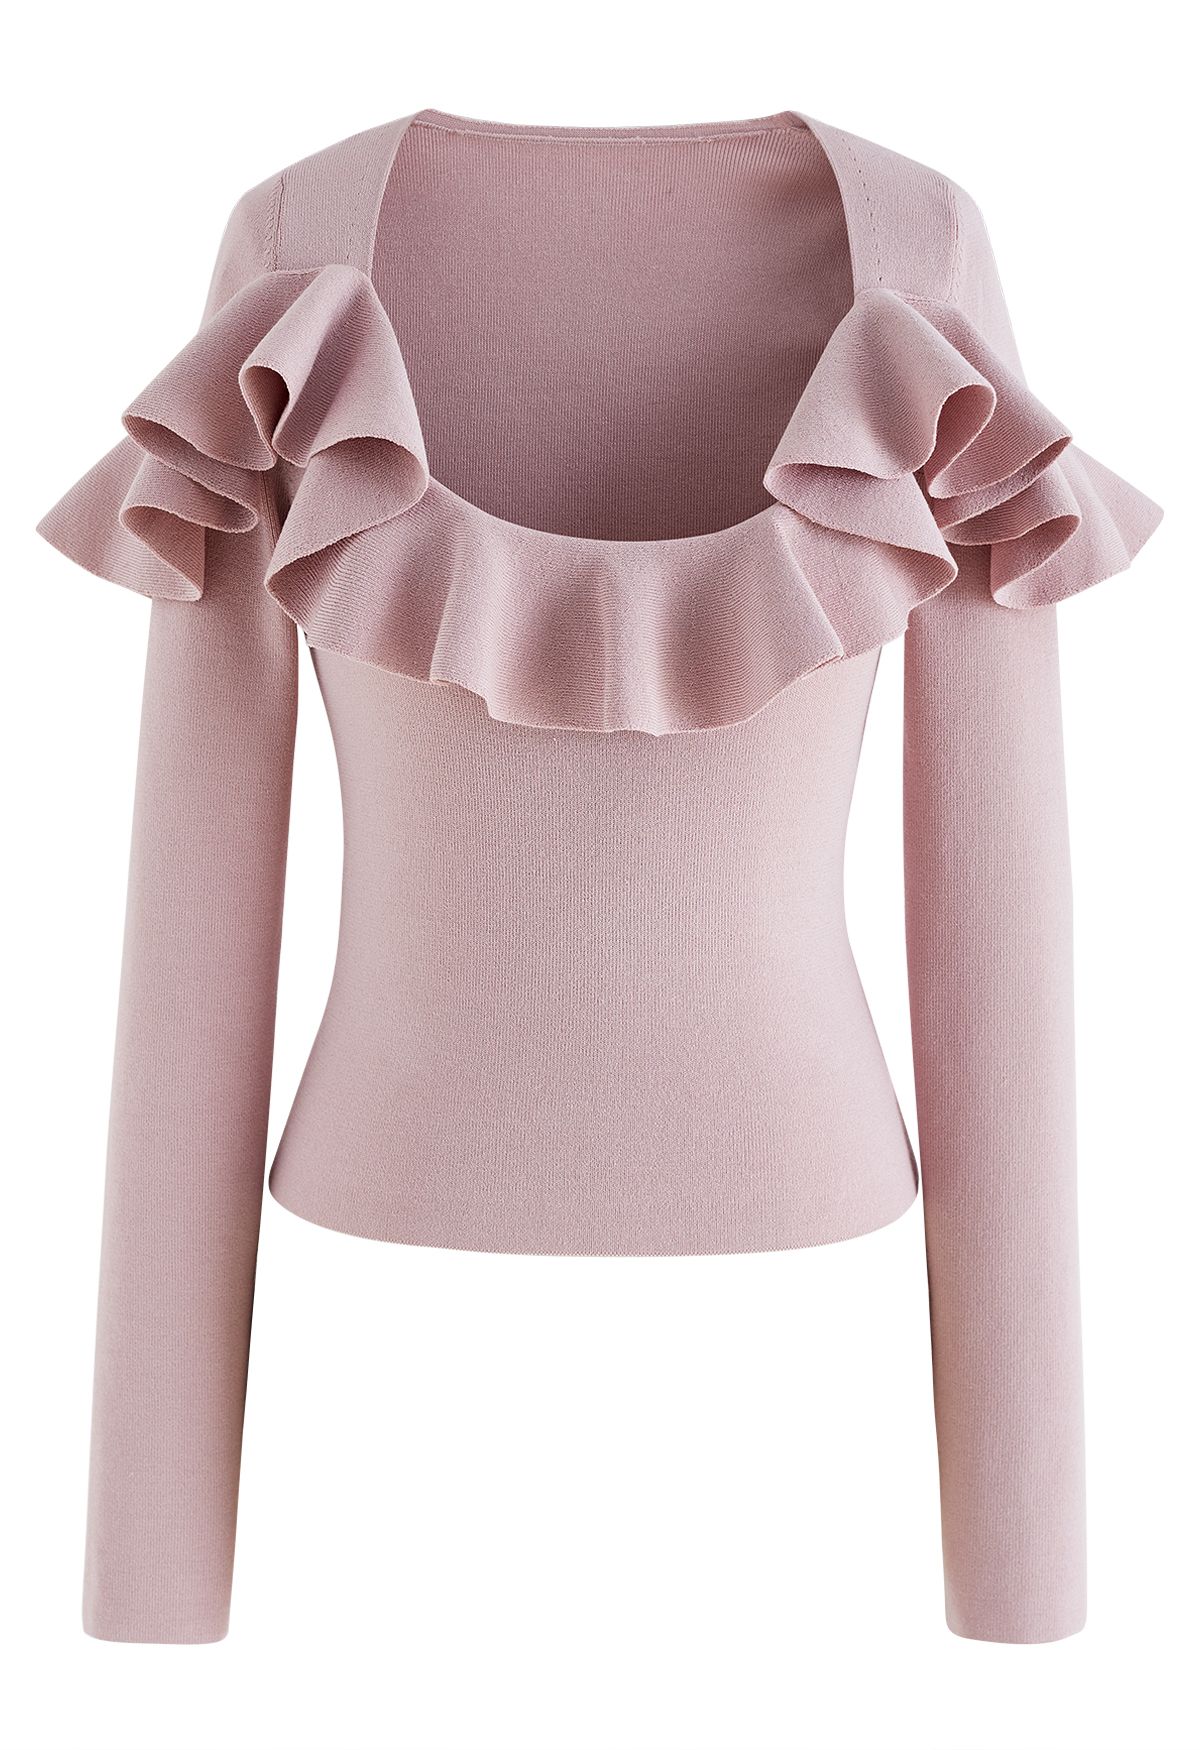 Sassy Wide Ruffled Neckline Knit Top in Dusty Pink